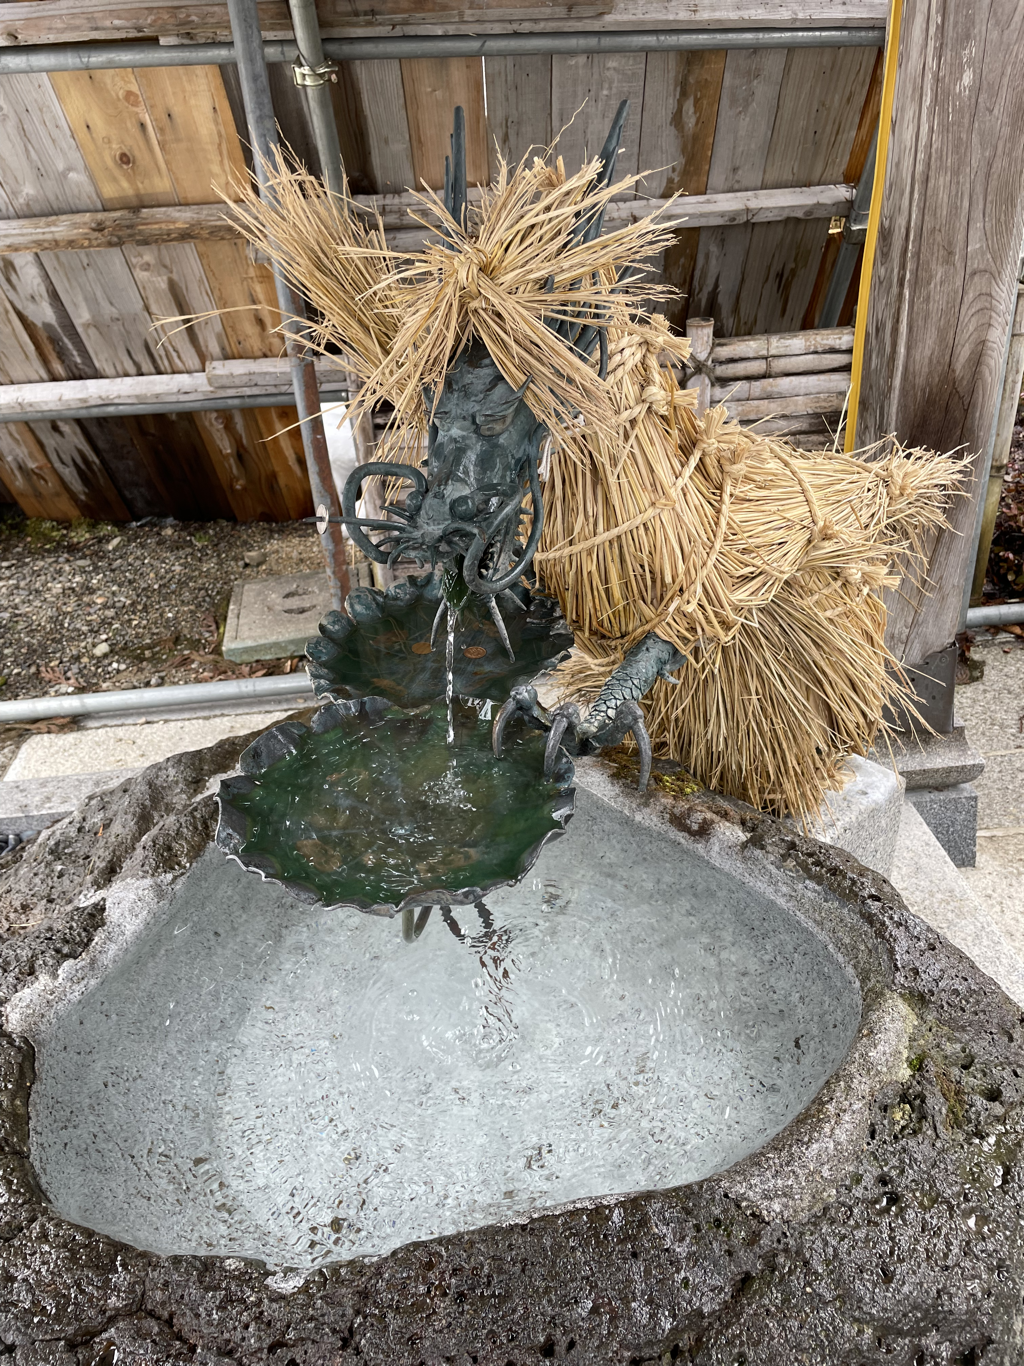 Dragon shaped water spout with snow in the background, wrapped in rice straw to insulate it against the winter cold and keep the water used for cleansing yourself flowing. 